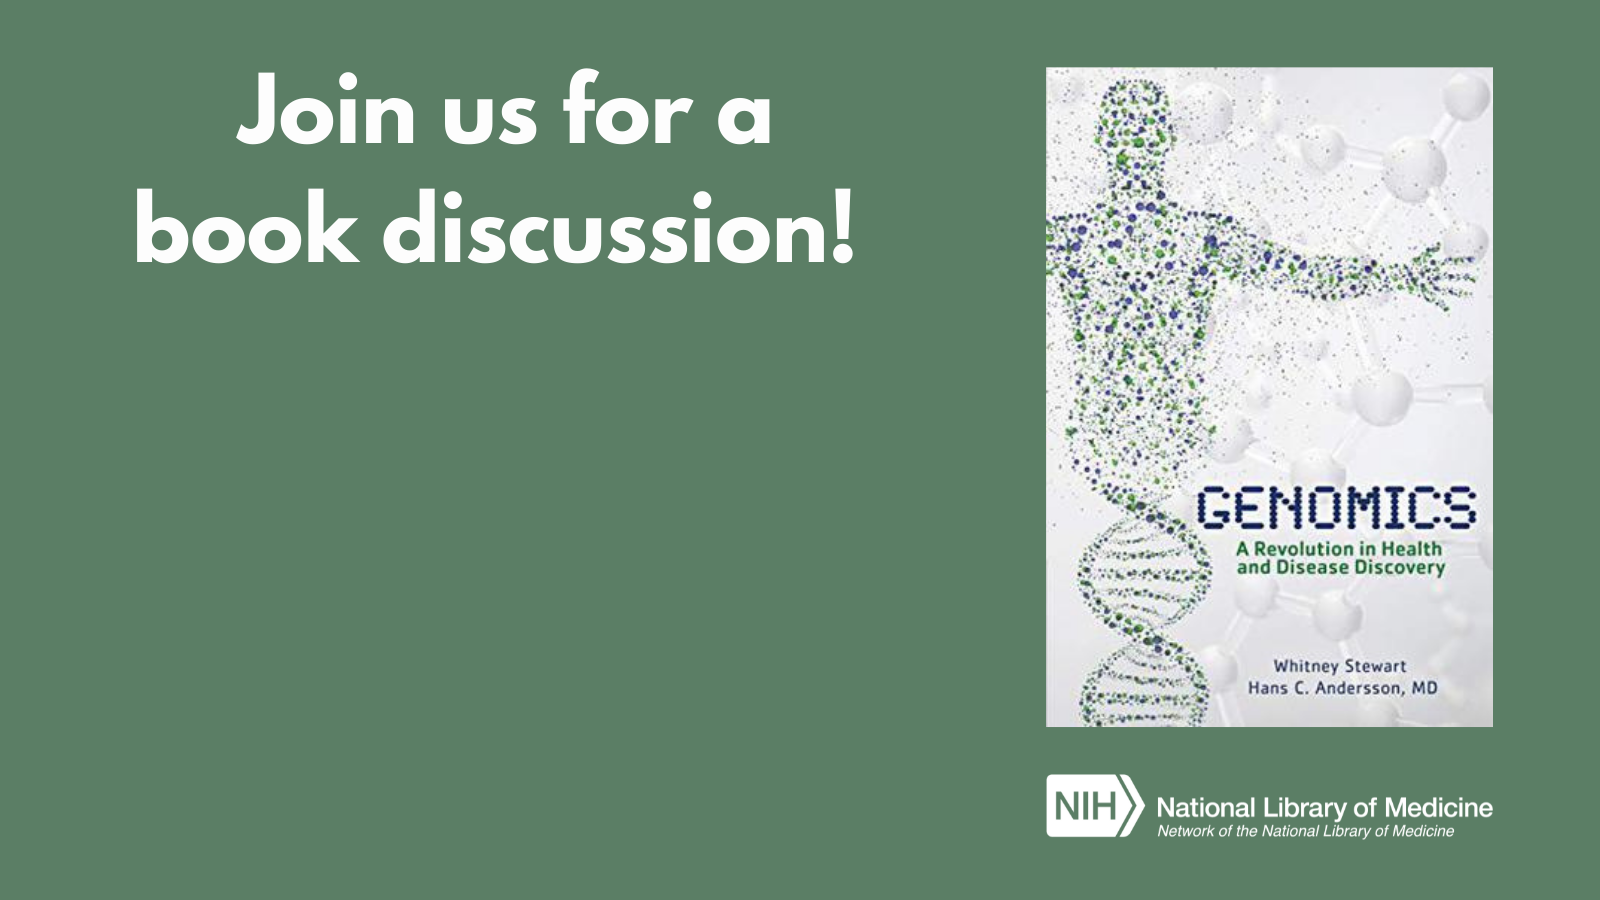 Join Us for a Discussion of Genomics